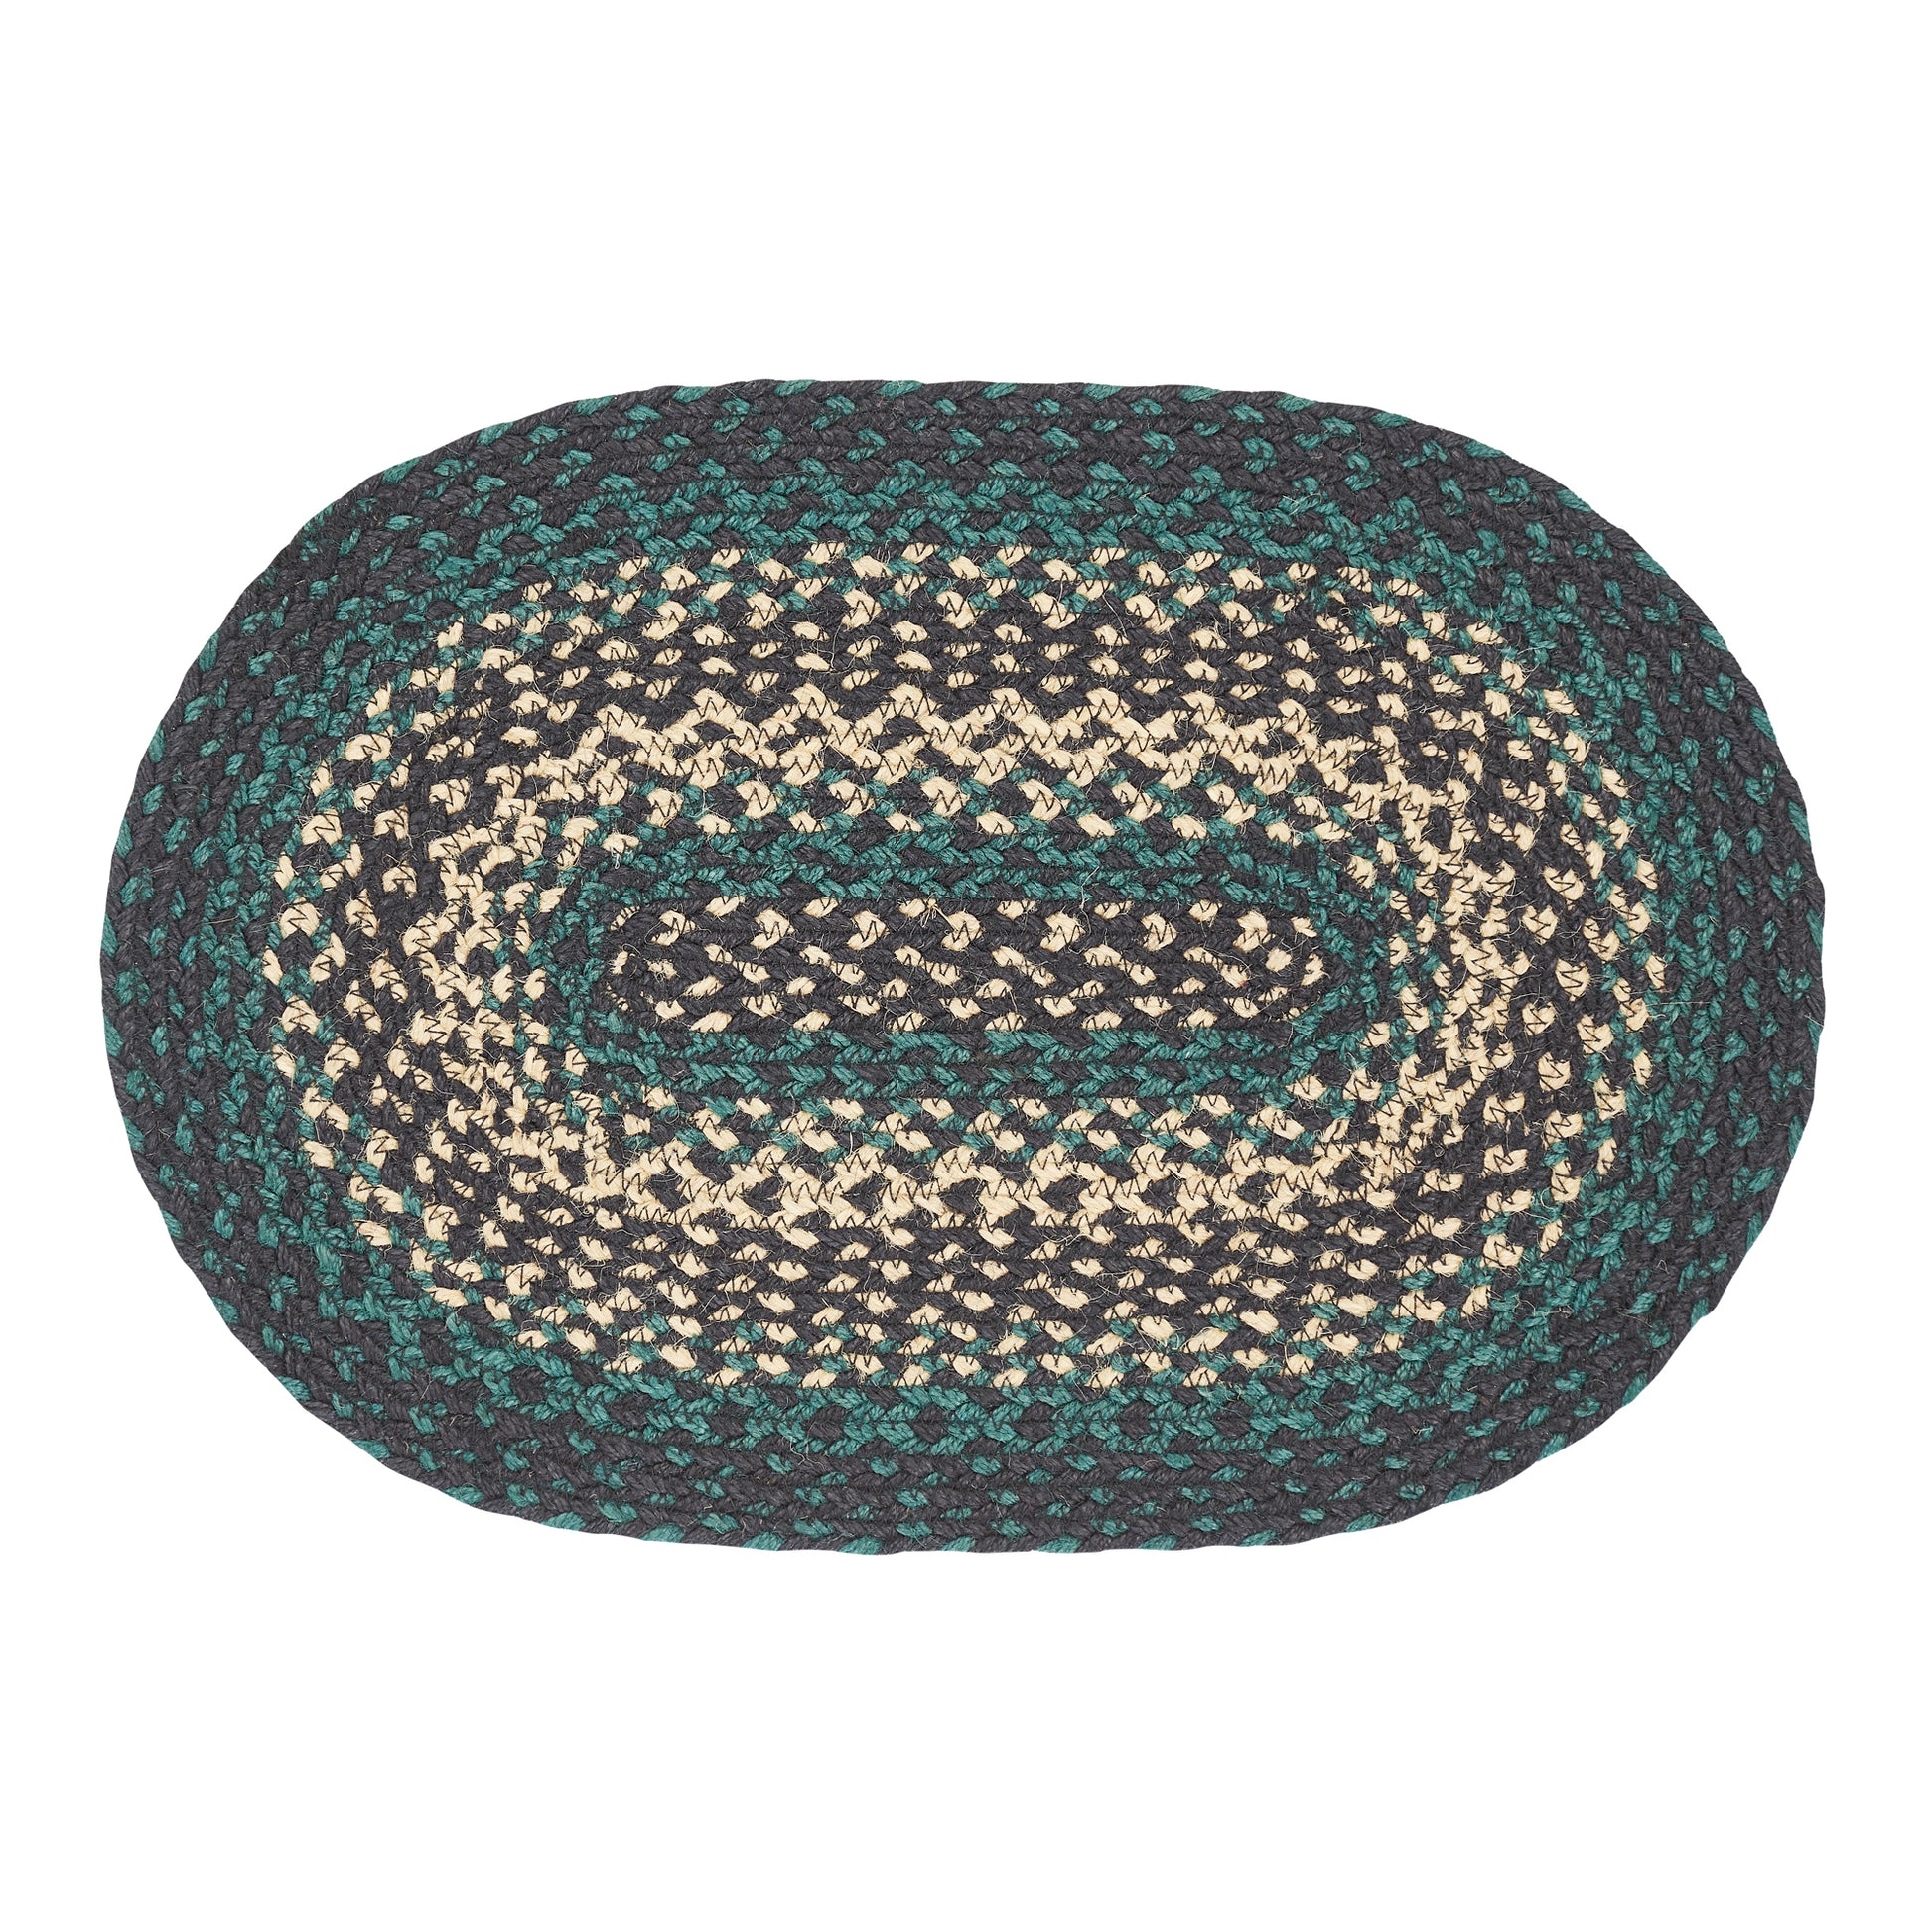 81402-Pine-Grove-Jute-Oval-Placemat-12x18-image-4